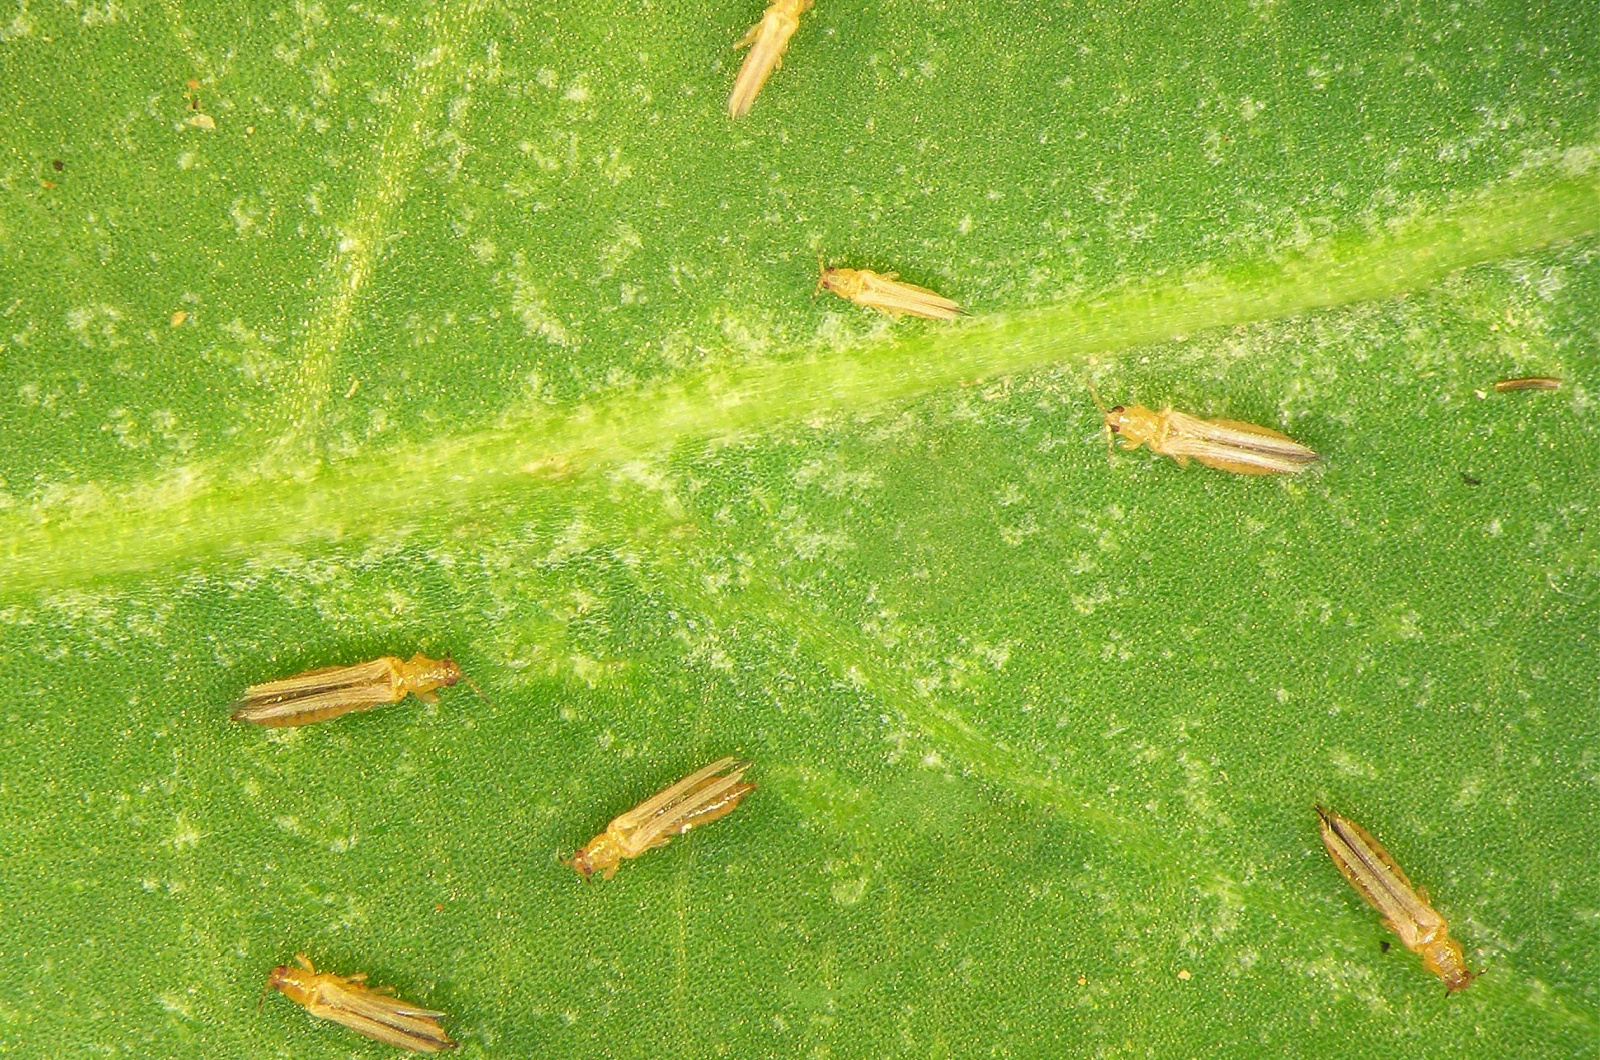 close-up photo of Thrips